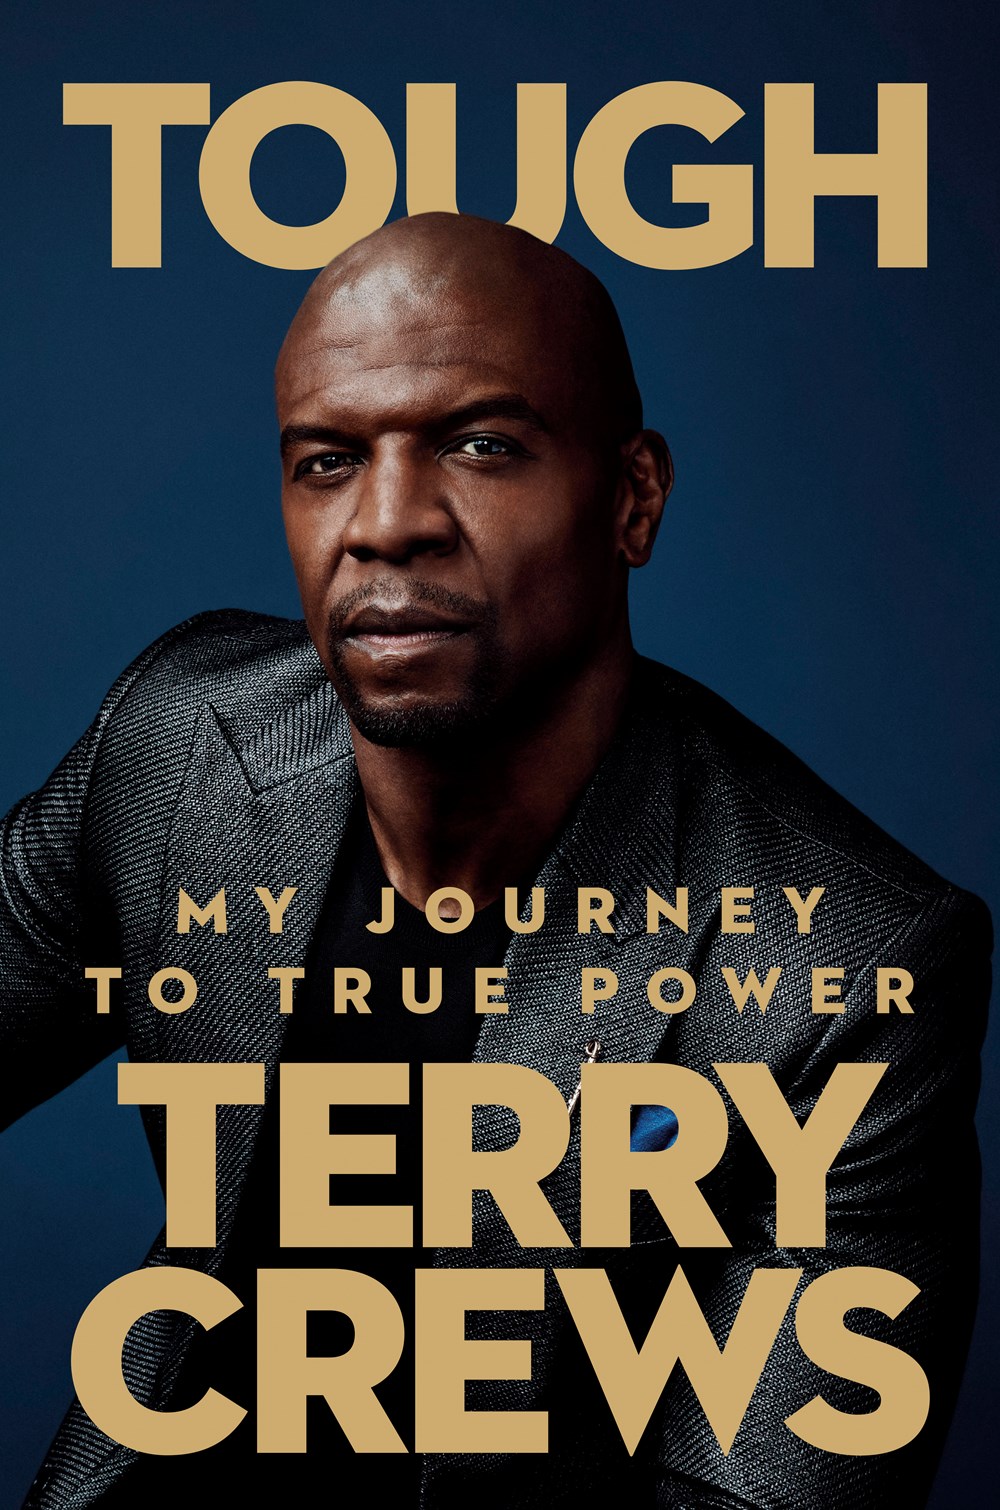 Image of "Tough: My Journey to True Power"